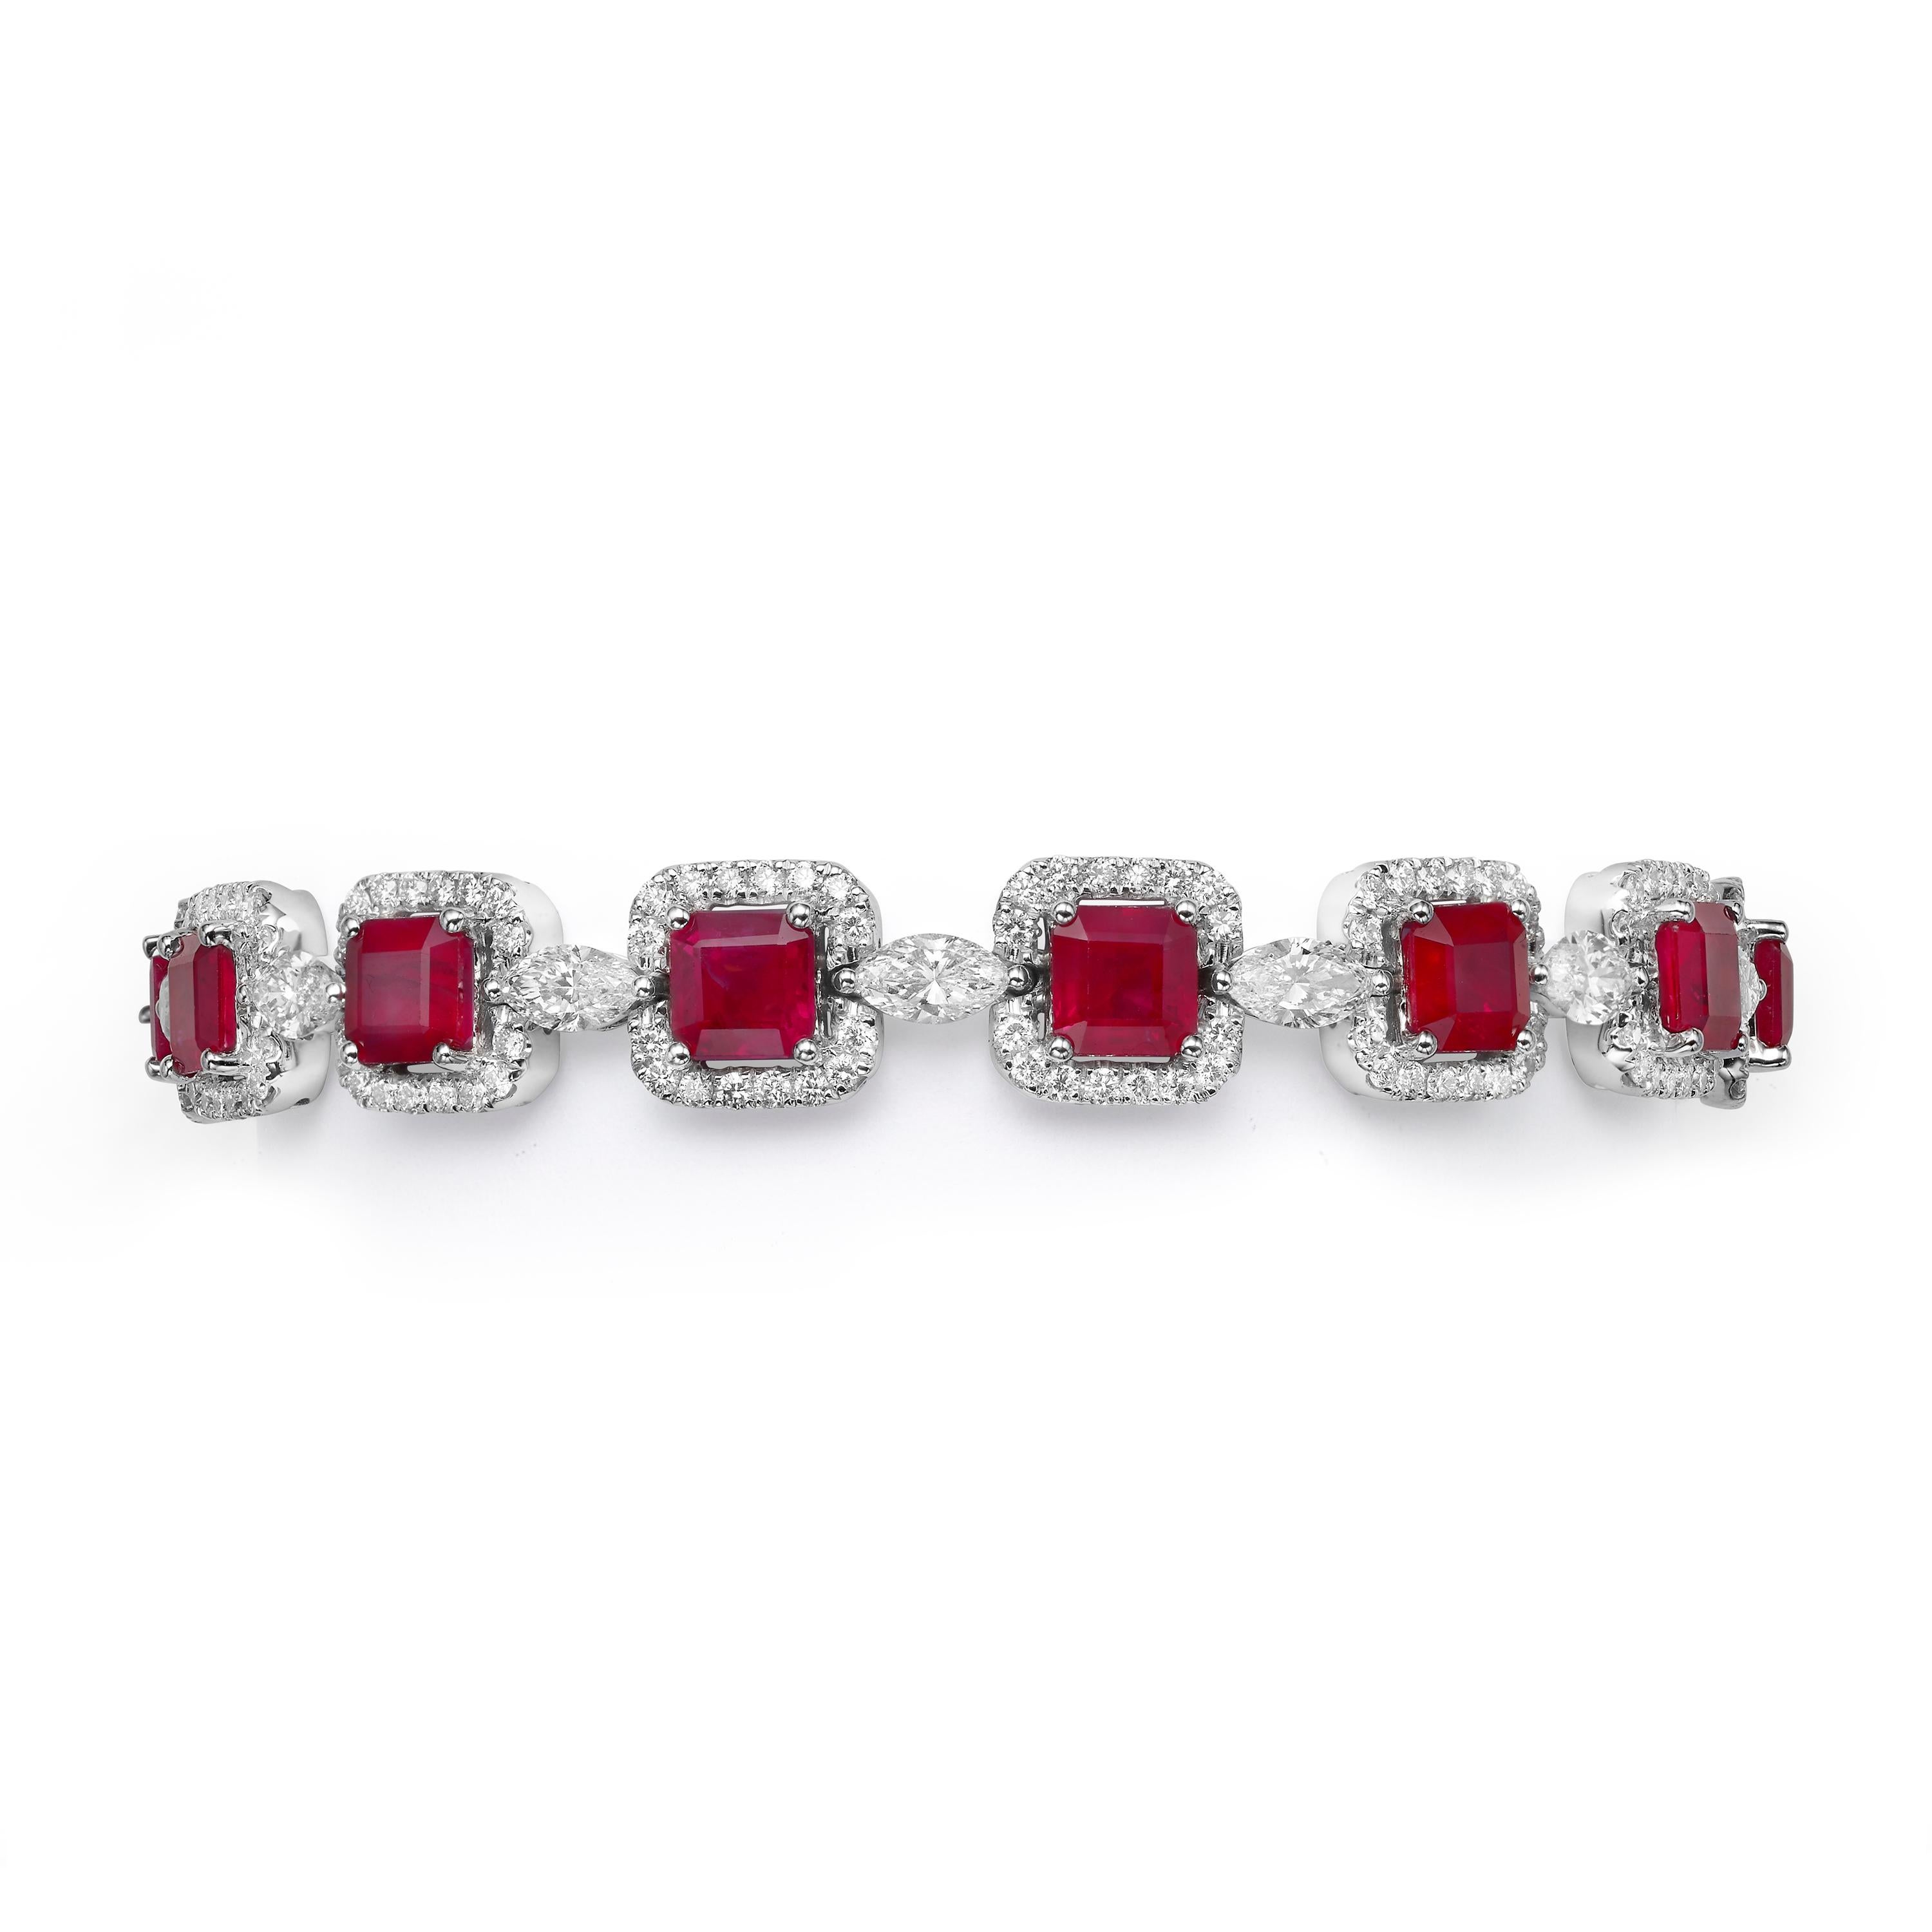 A ruby and diamond bracelet handcrafted from 18K white gold.  An octagon red ruby sits in the center of each link and is encircled by a glittering halo of white diamonds and glistening marquise-cut diamonds link each piece in the bracelet.  The